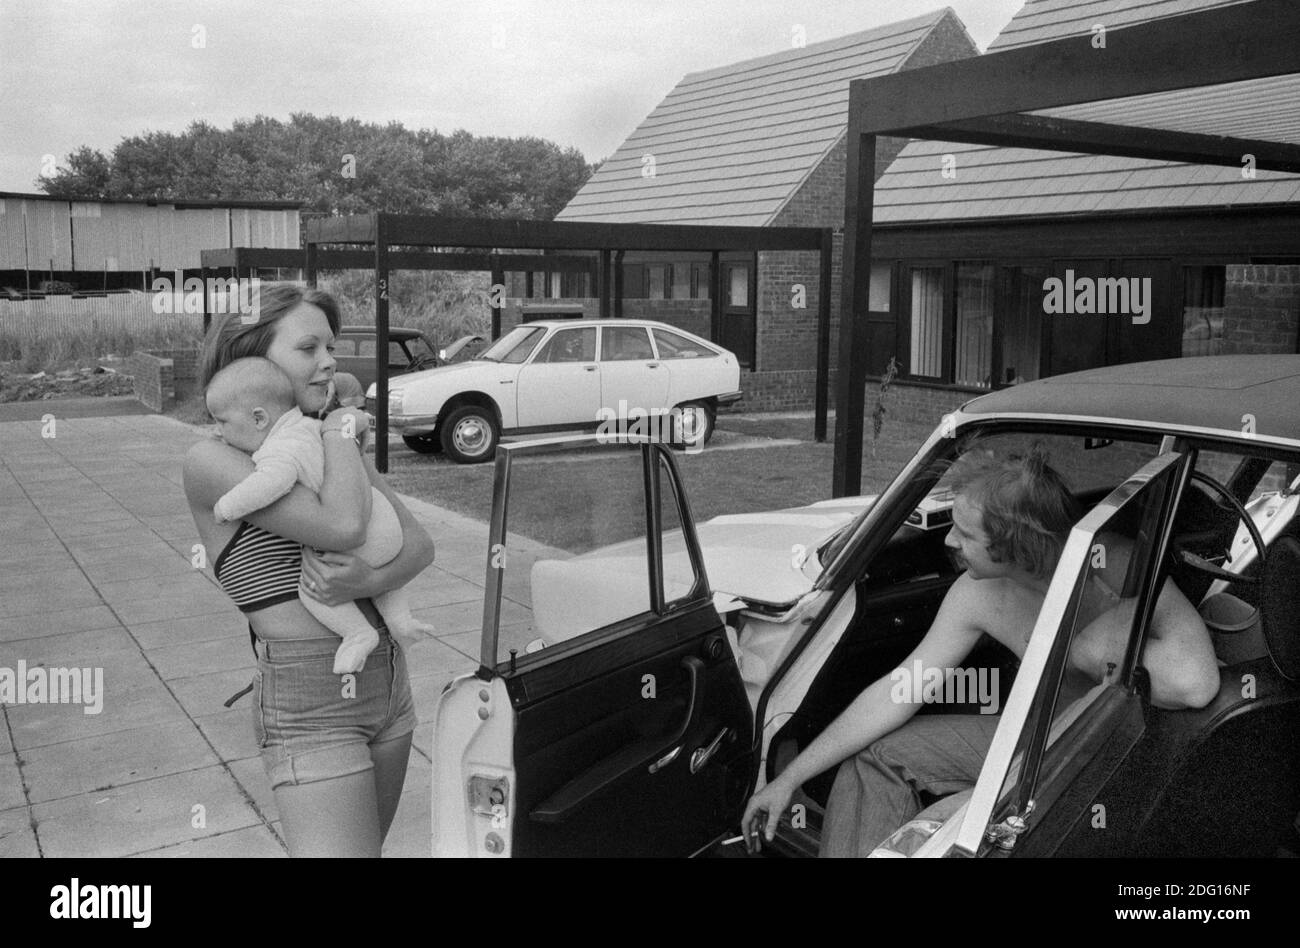 1970s UK, professional middle income couple outside their new modern home on a recently built new housing estate, a modern development. Hanging out with the new baby in arms by their car that is parked out side their home 1977 England. Milton Keynes Buckinghamshire HOMER SYKES Stock Photo